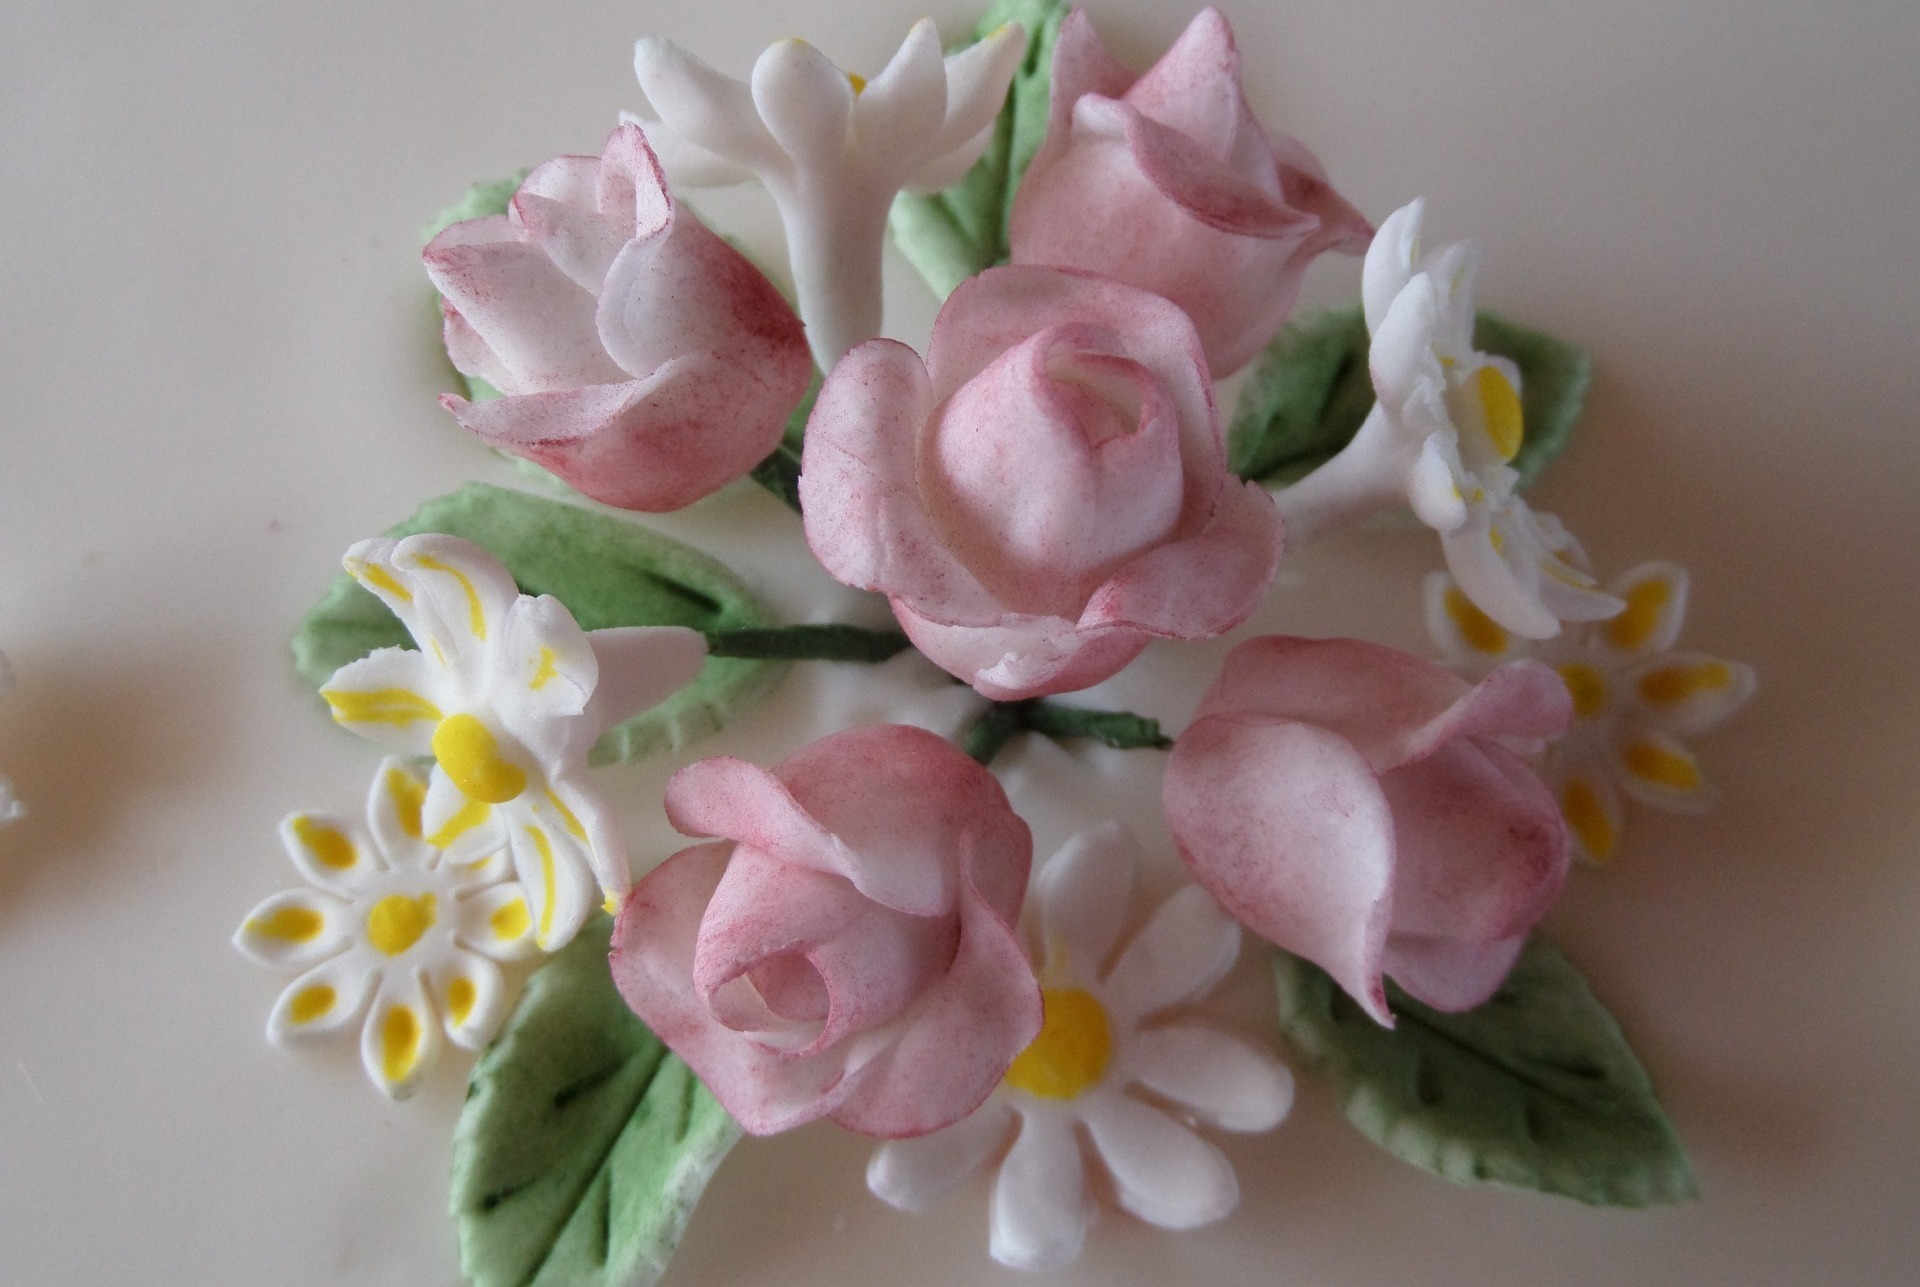 roses and daisies small sugar bouquet